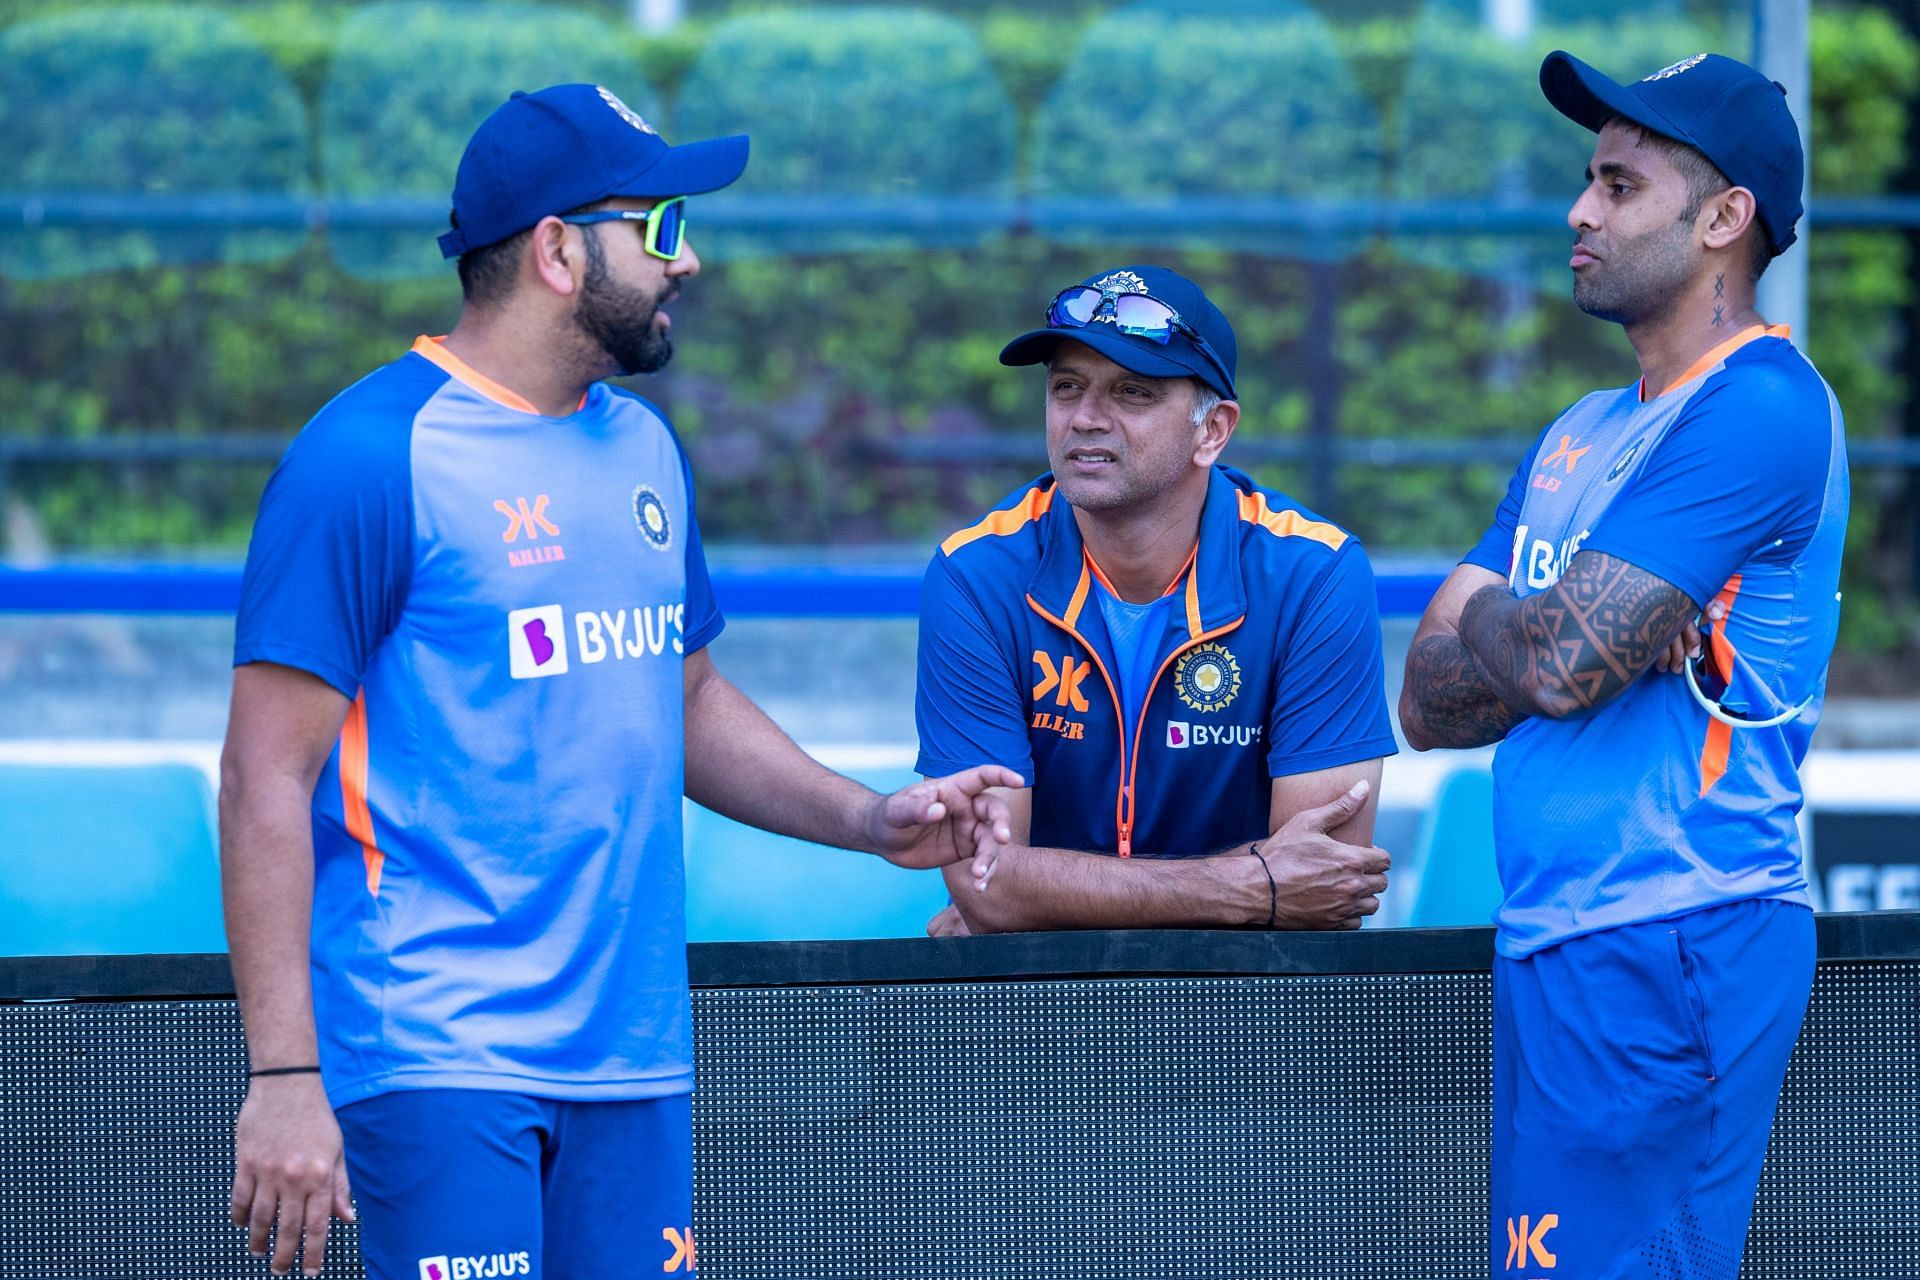 Rohit Sharma (left) and Rahul Dravid (centre) during a training session in Nagpur [Credits: BCCI]